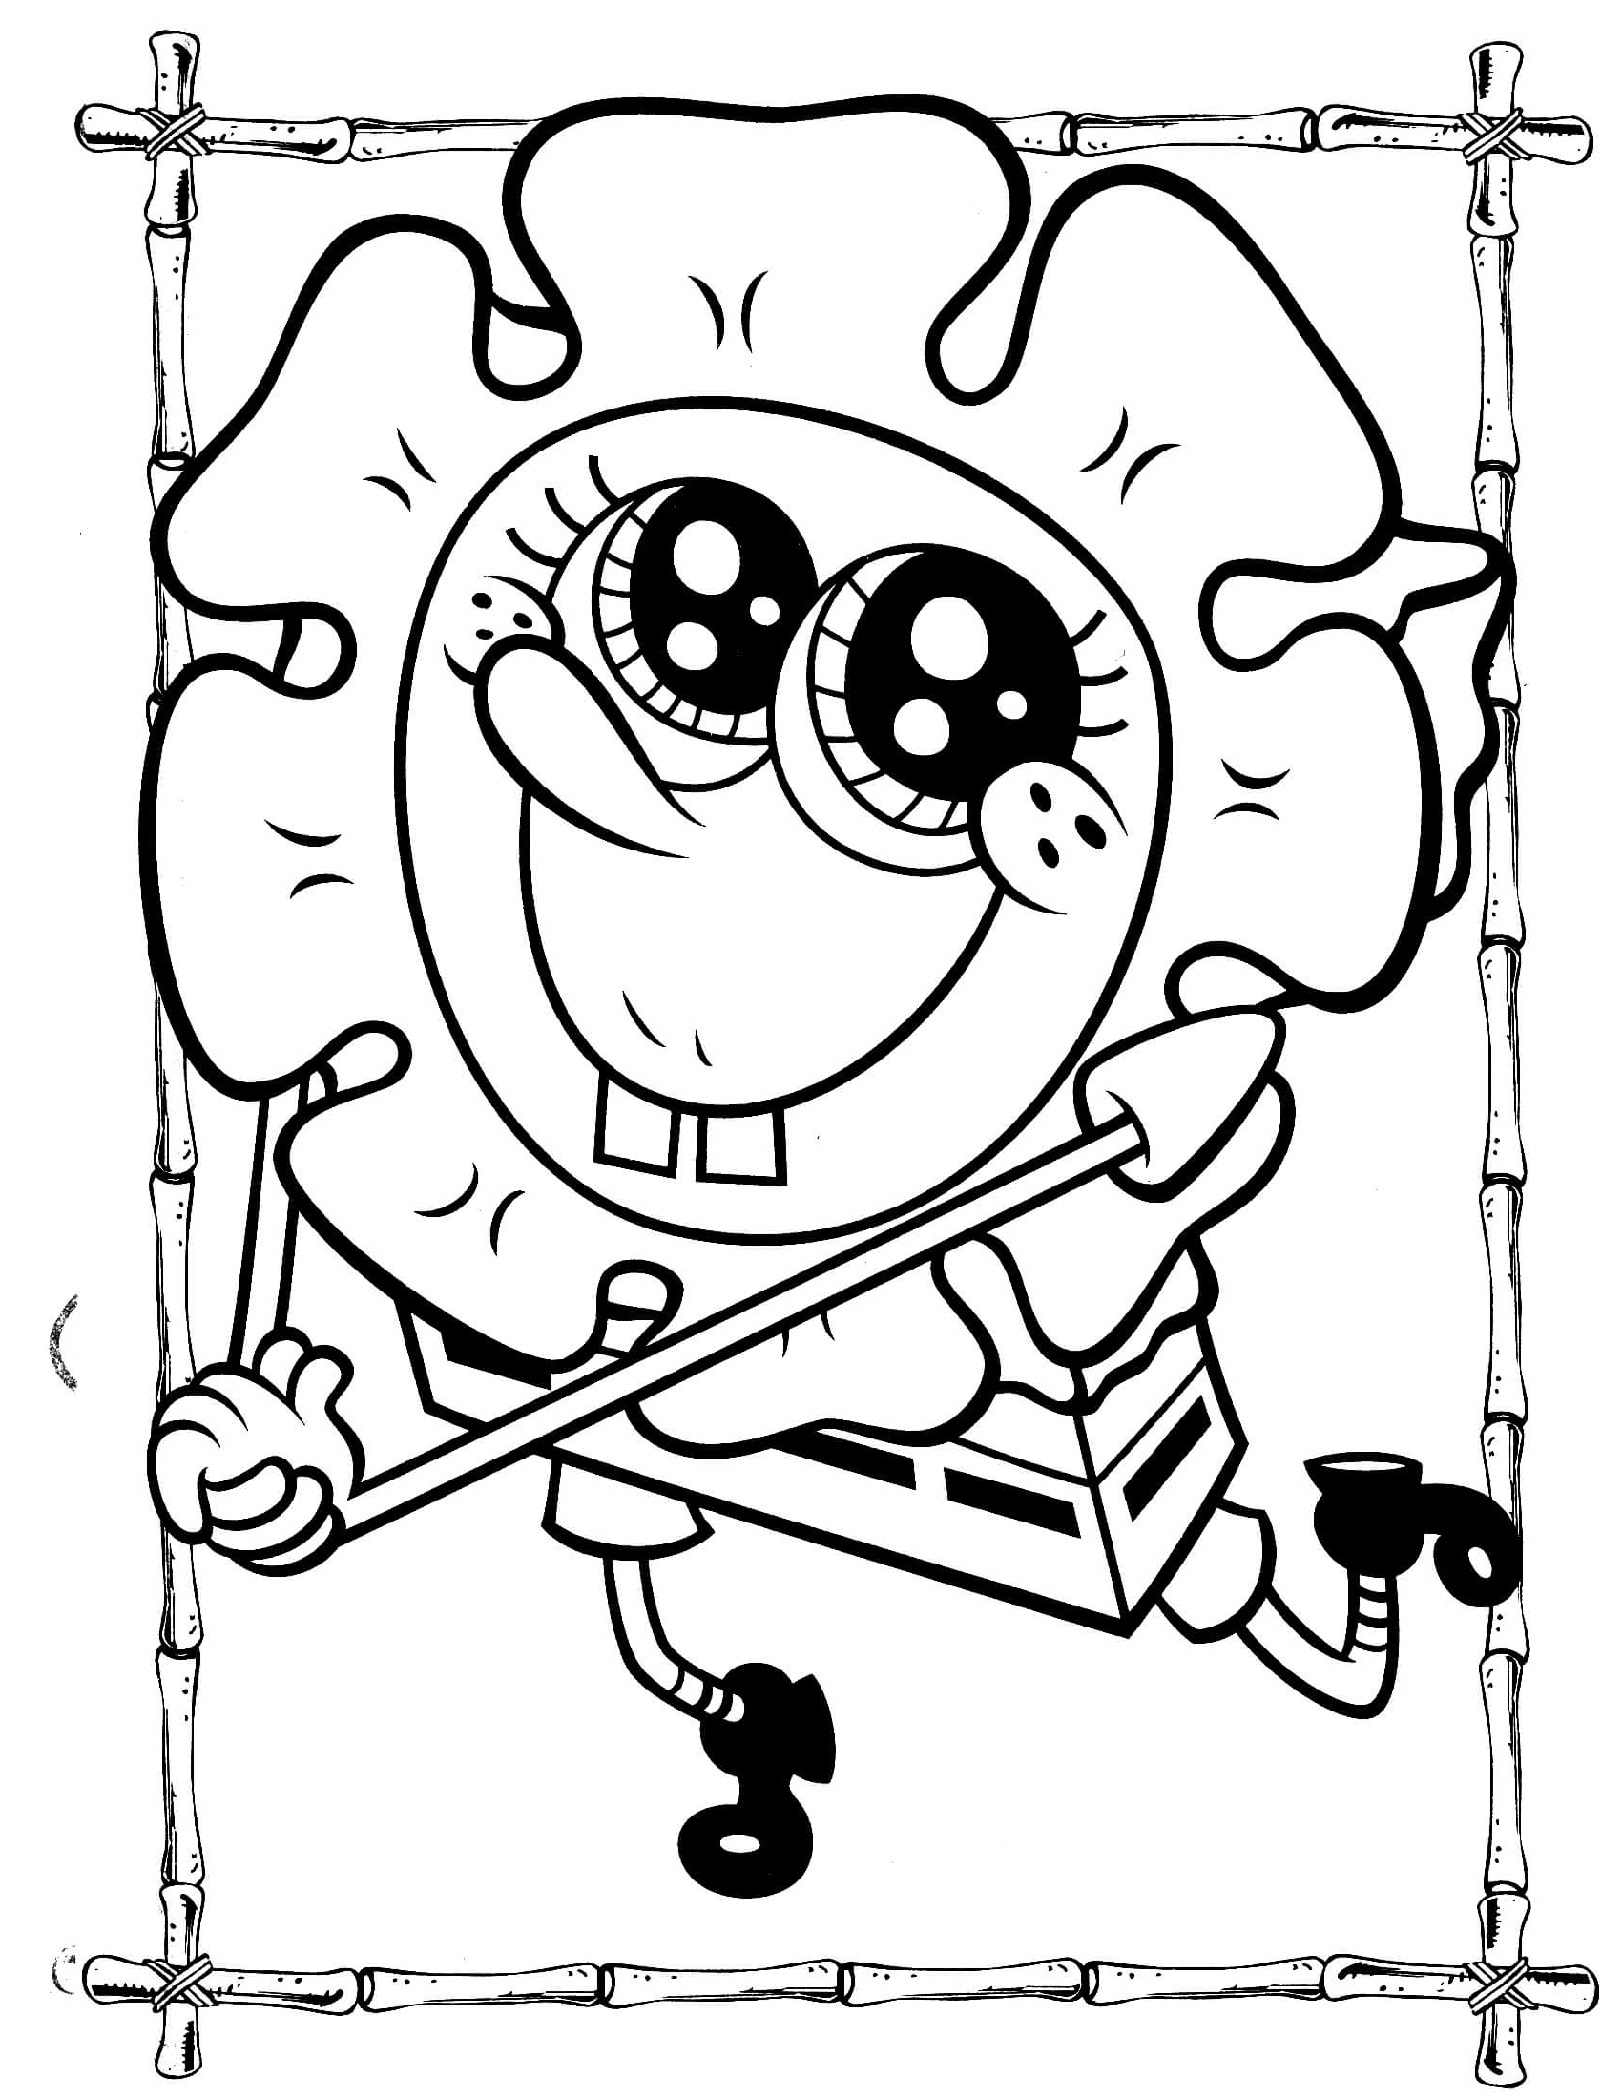 Funny Spongebob Coloring Pages Printables 32